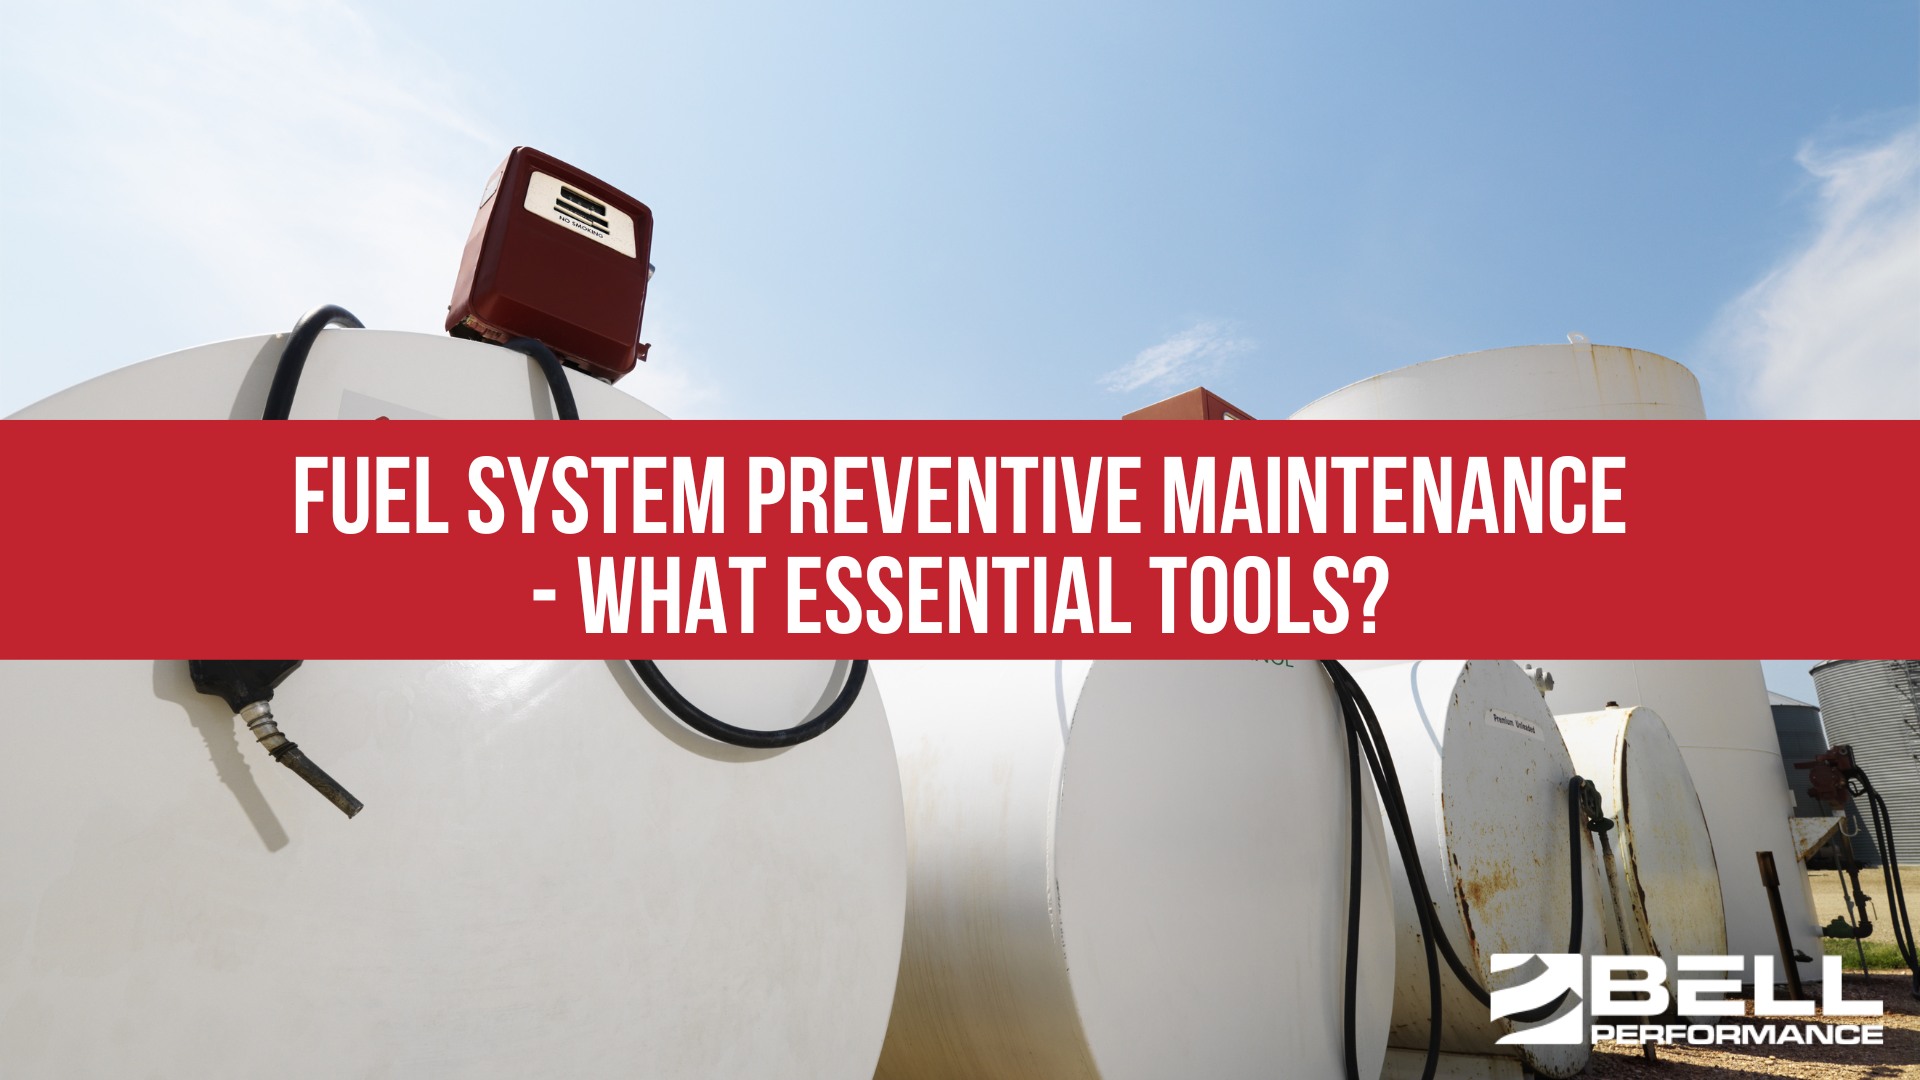 Fuel System Preventive Maintenance - What Essential Tools?